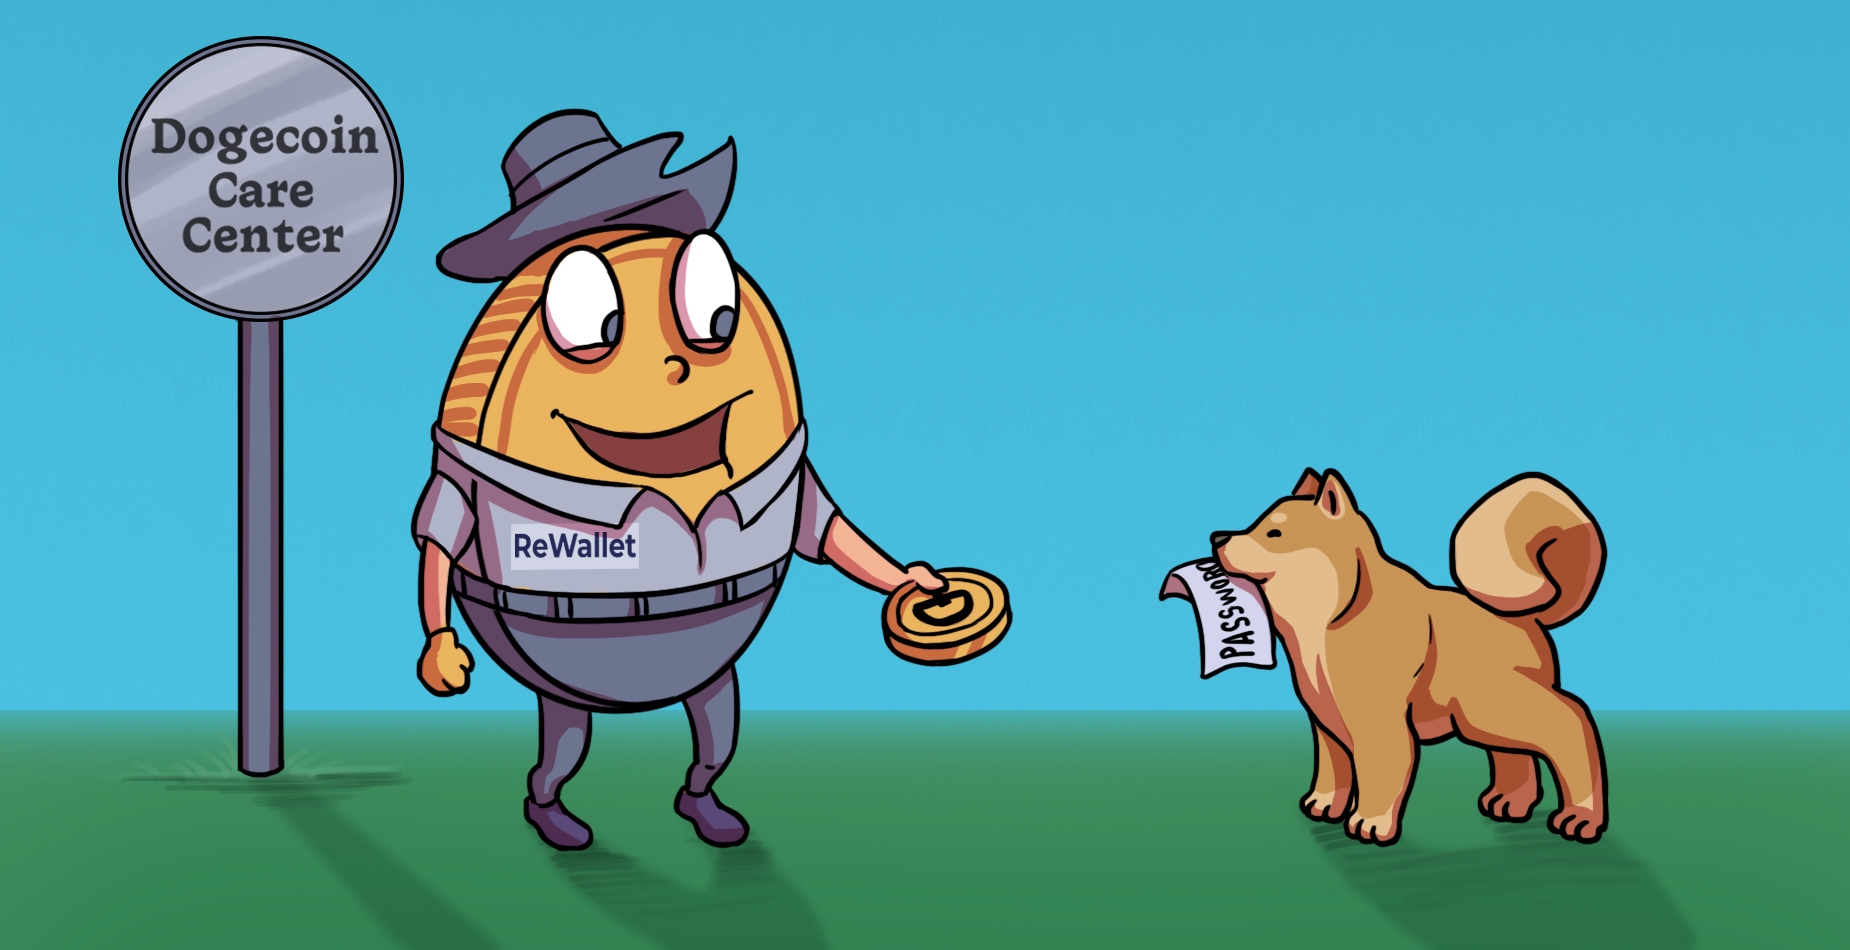 A shiba inu dog, symbolizing the need to recover Dogecoin wallet, exchanges a paper with the Dogecoin password with a zookeeper.